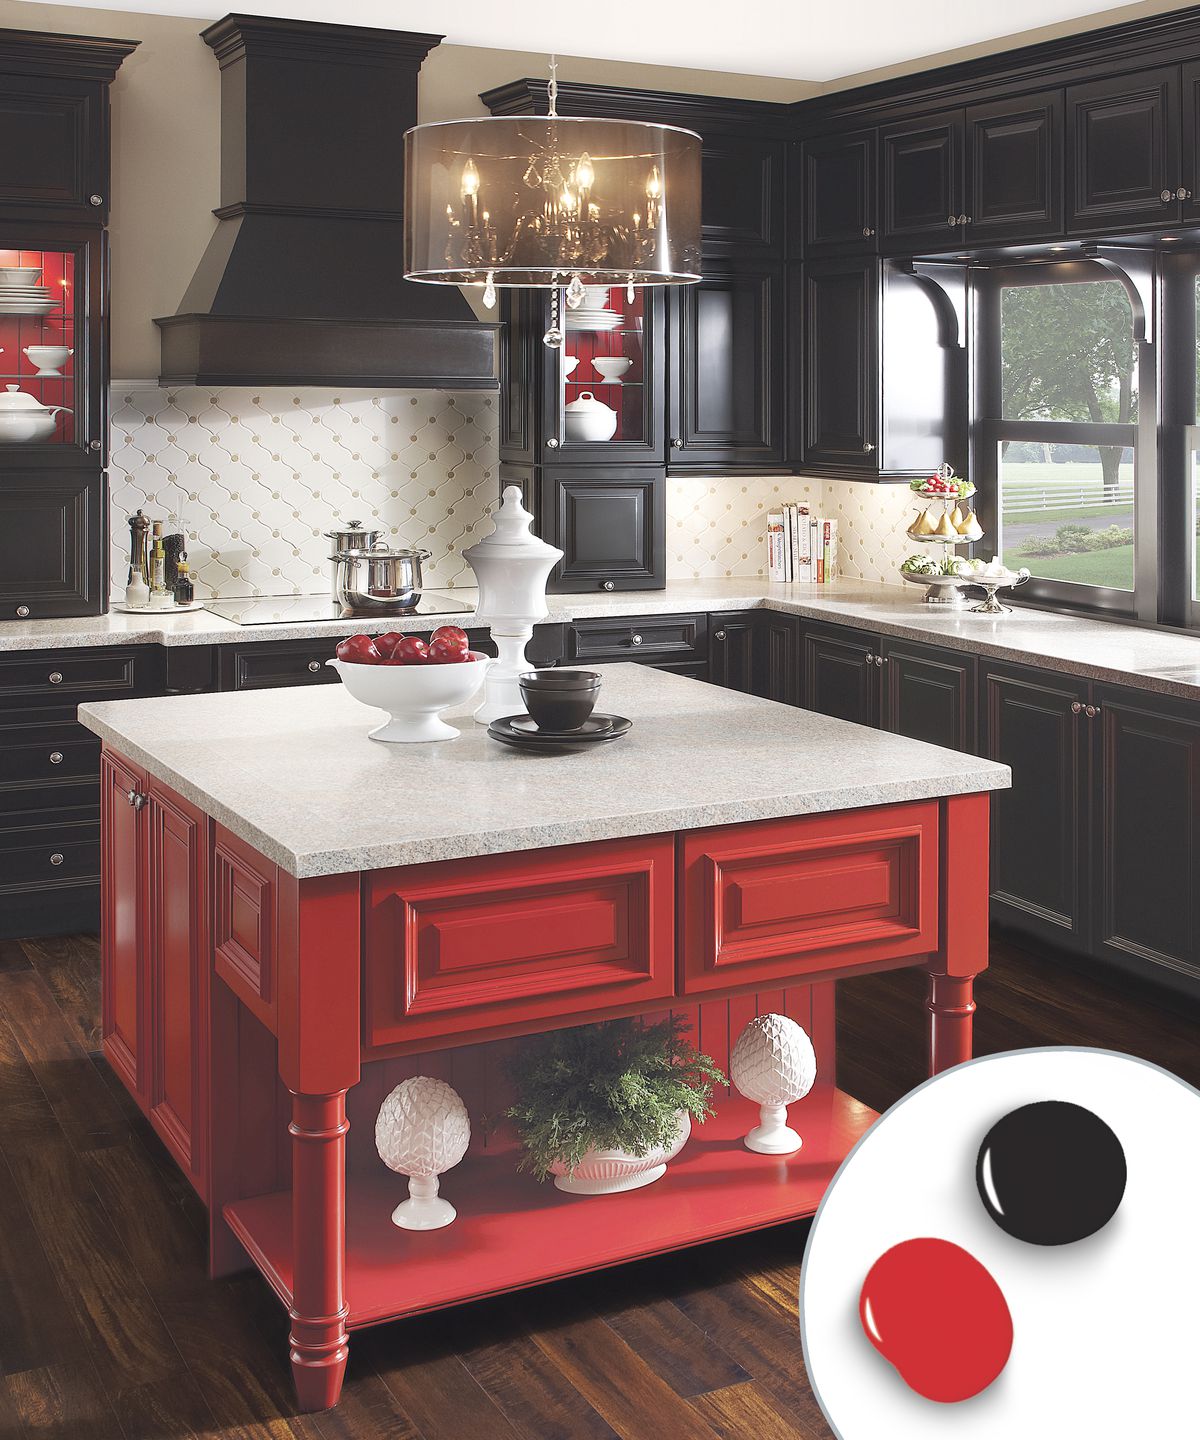 Bold red kitchen island with white countertop in front of black kitchen cabinets.